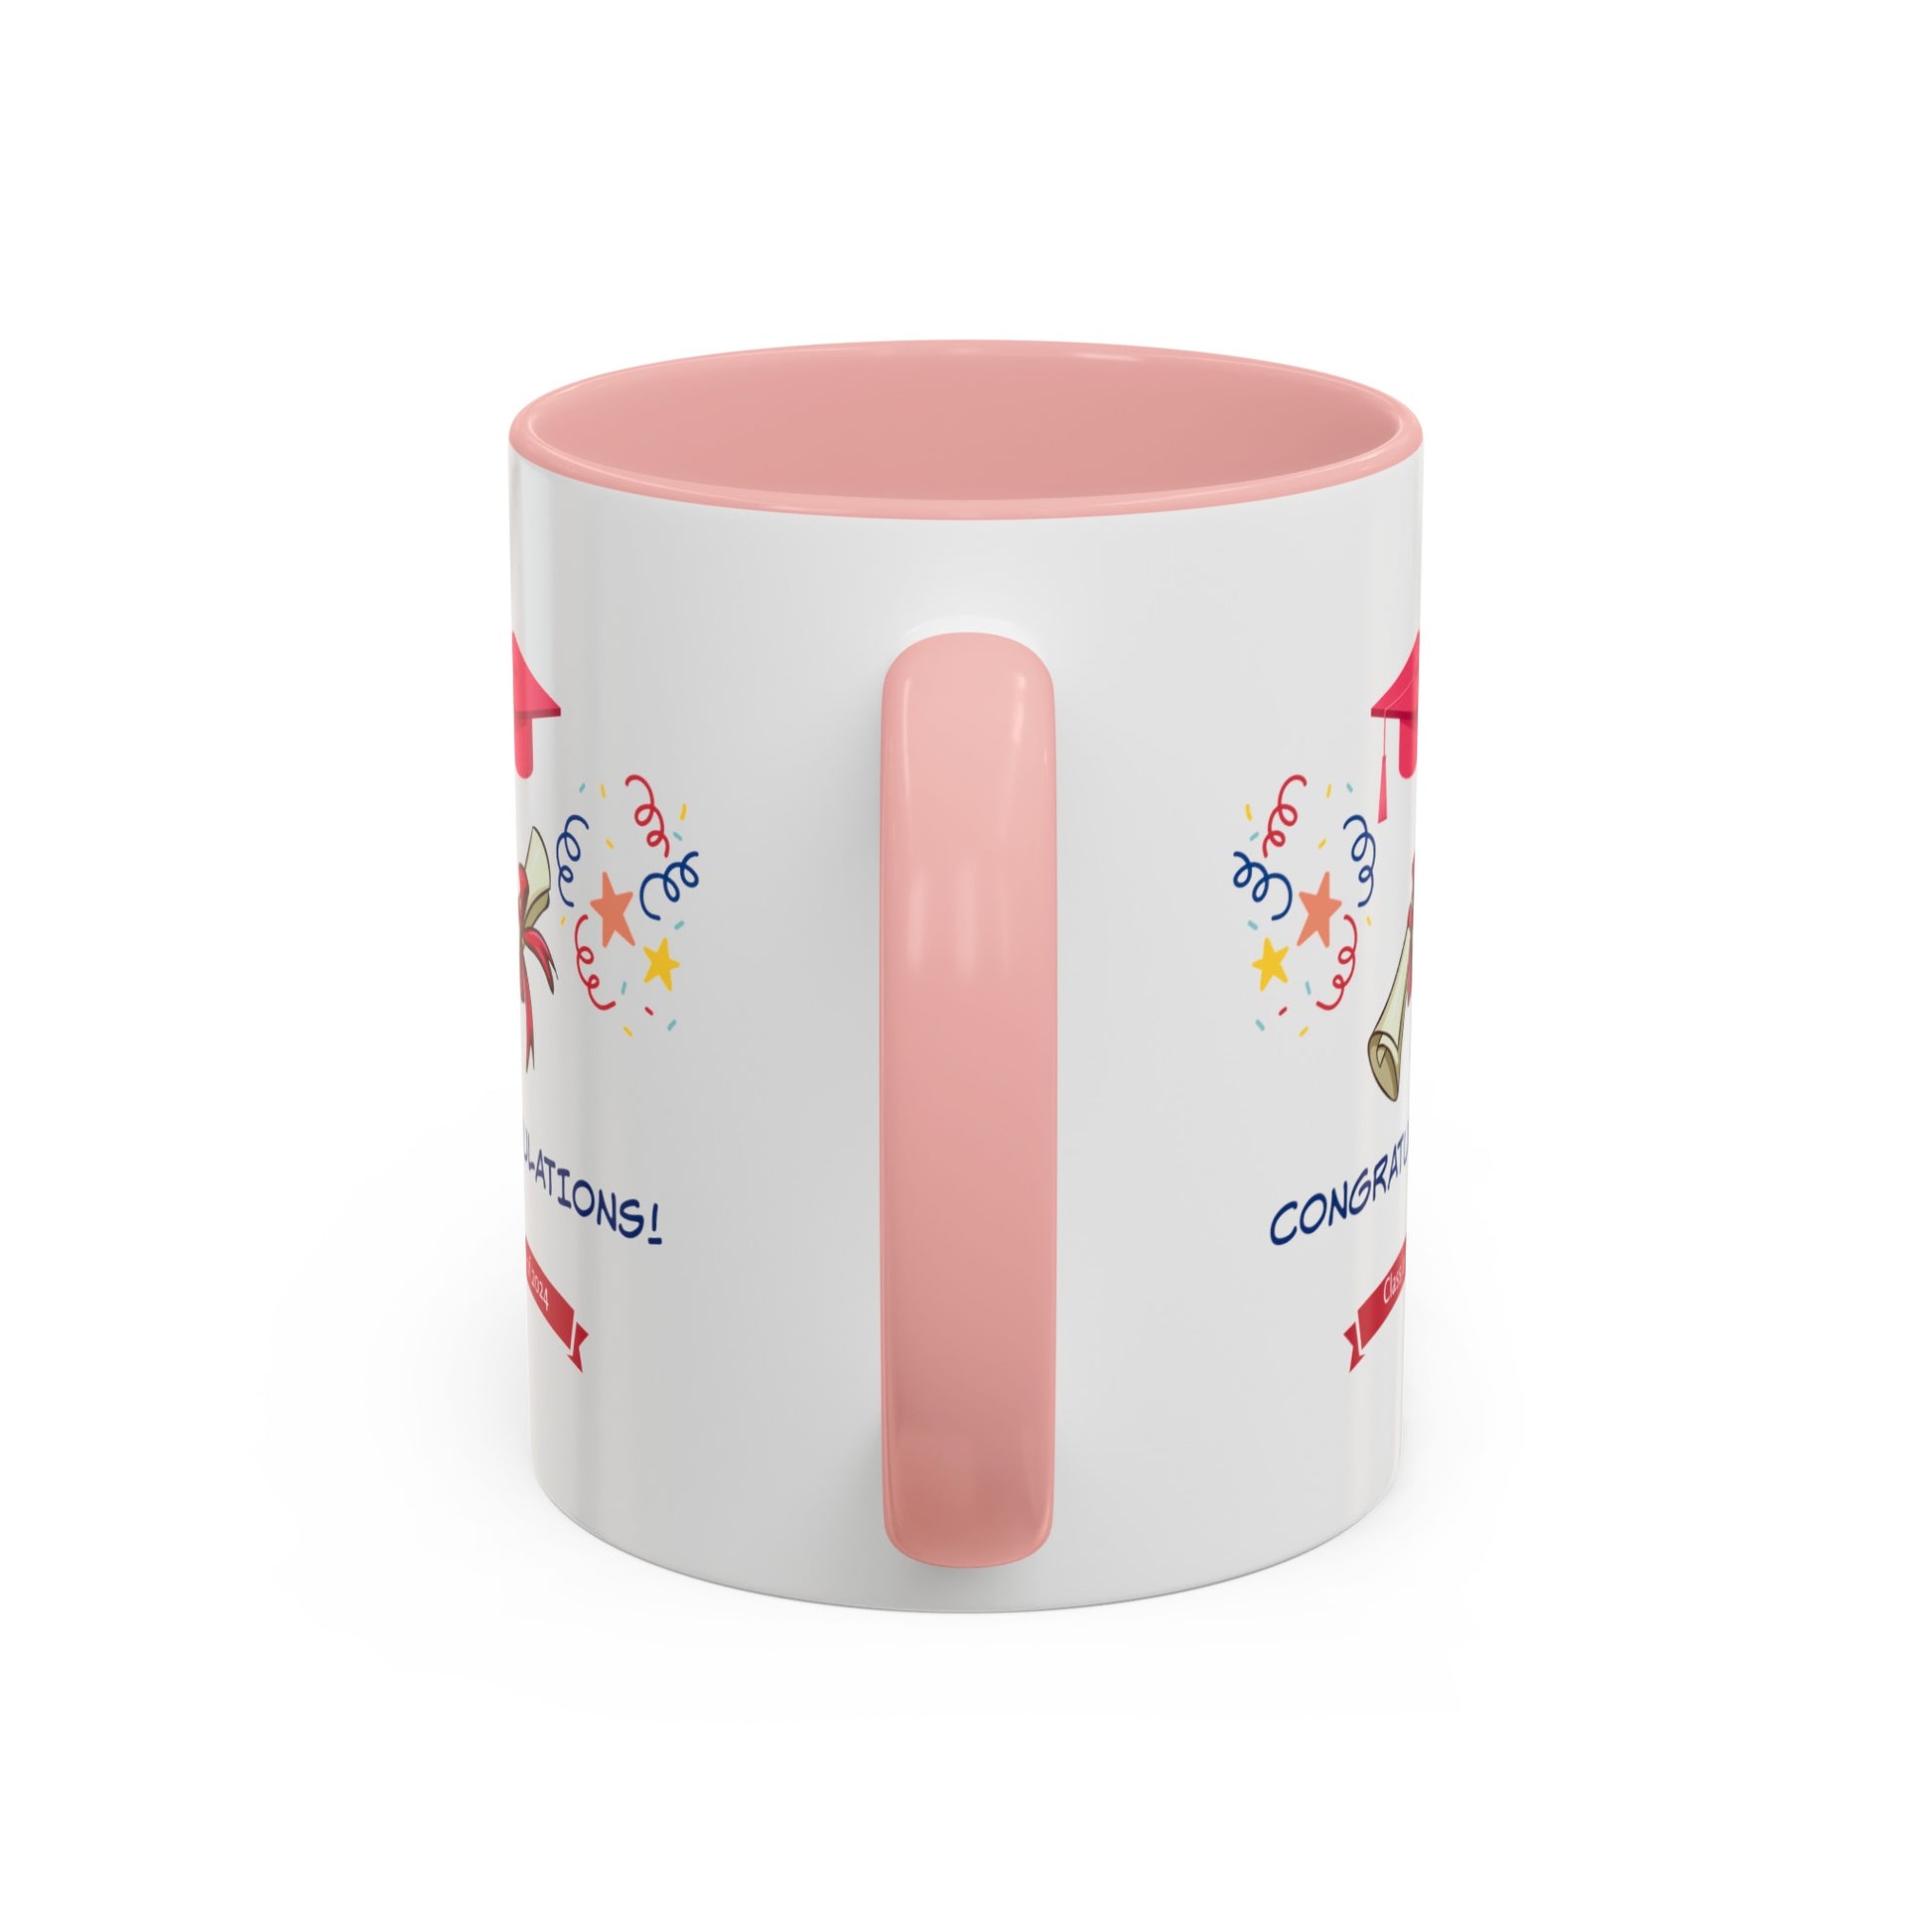 A 2024 Congratulations Mug: Graduation; 11 oz.; 2 Colors with a pink handle and interior features a graduation-themed design with celebratory confetti and the words "2024 Congratulations". This custom American made Printify mug is perfect for celebrating academic achievements.